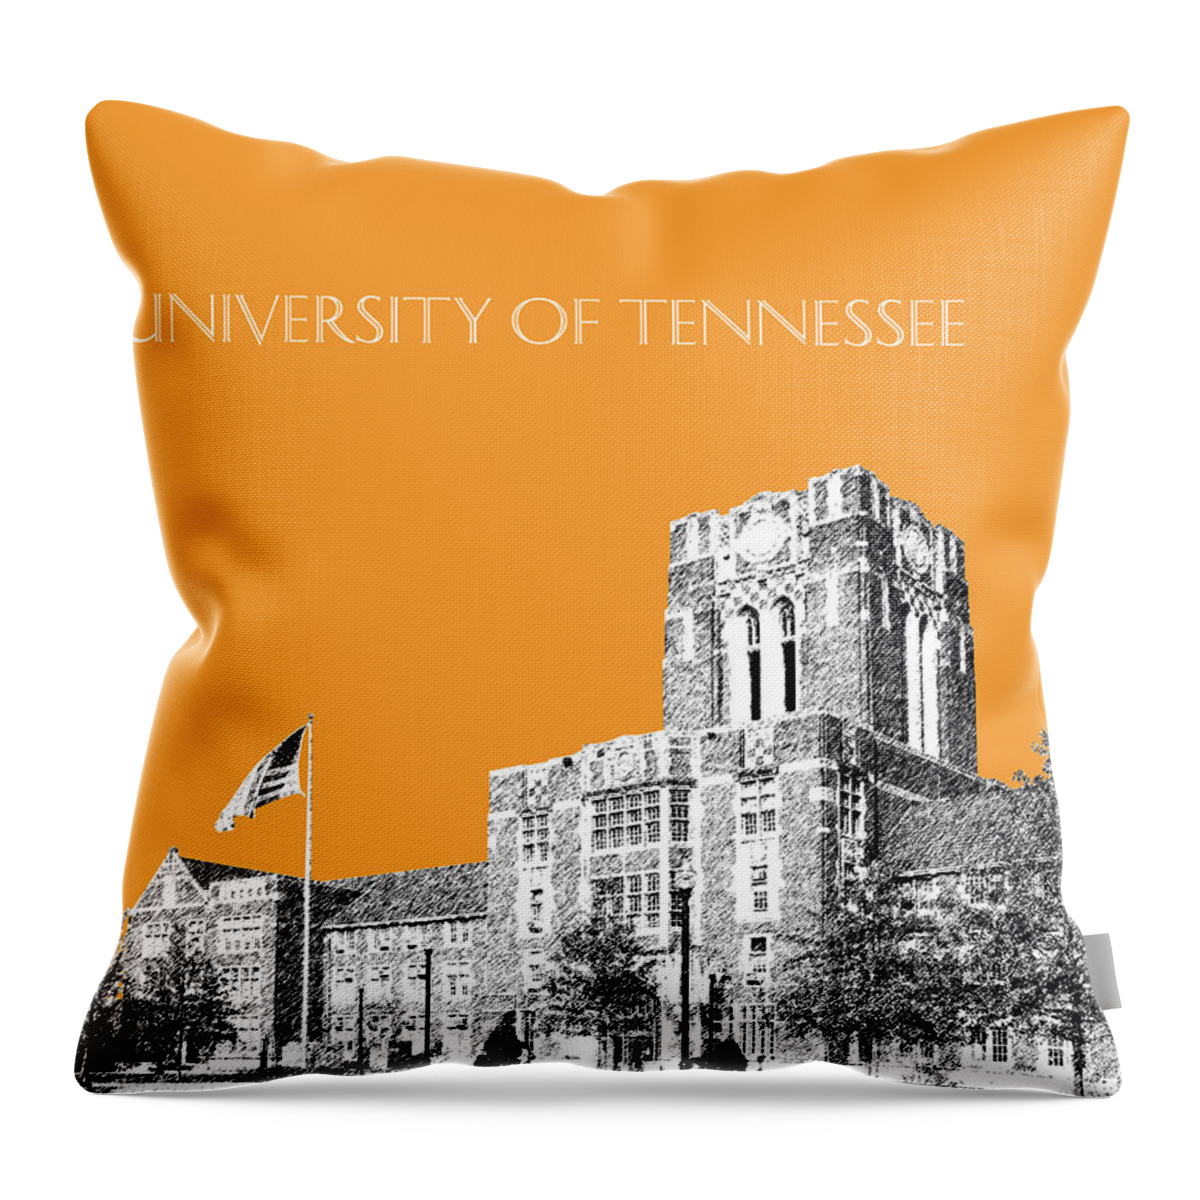 University Throw Pillow featuring the digital art University of Tennessee - Orange by DB Artist